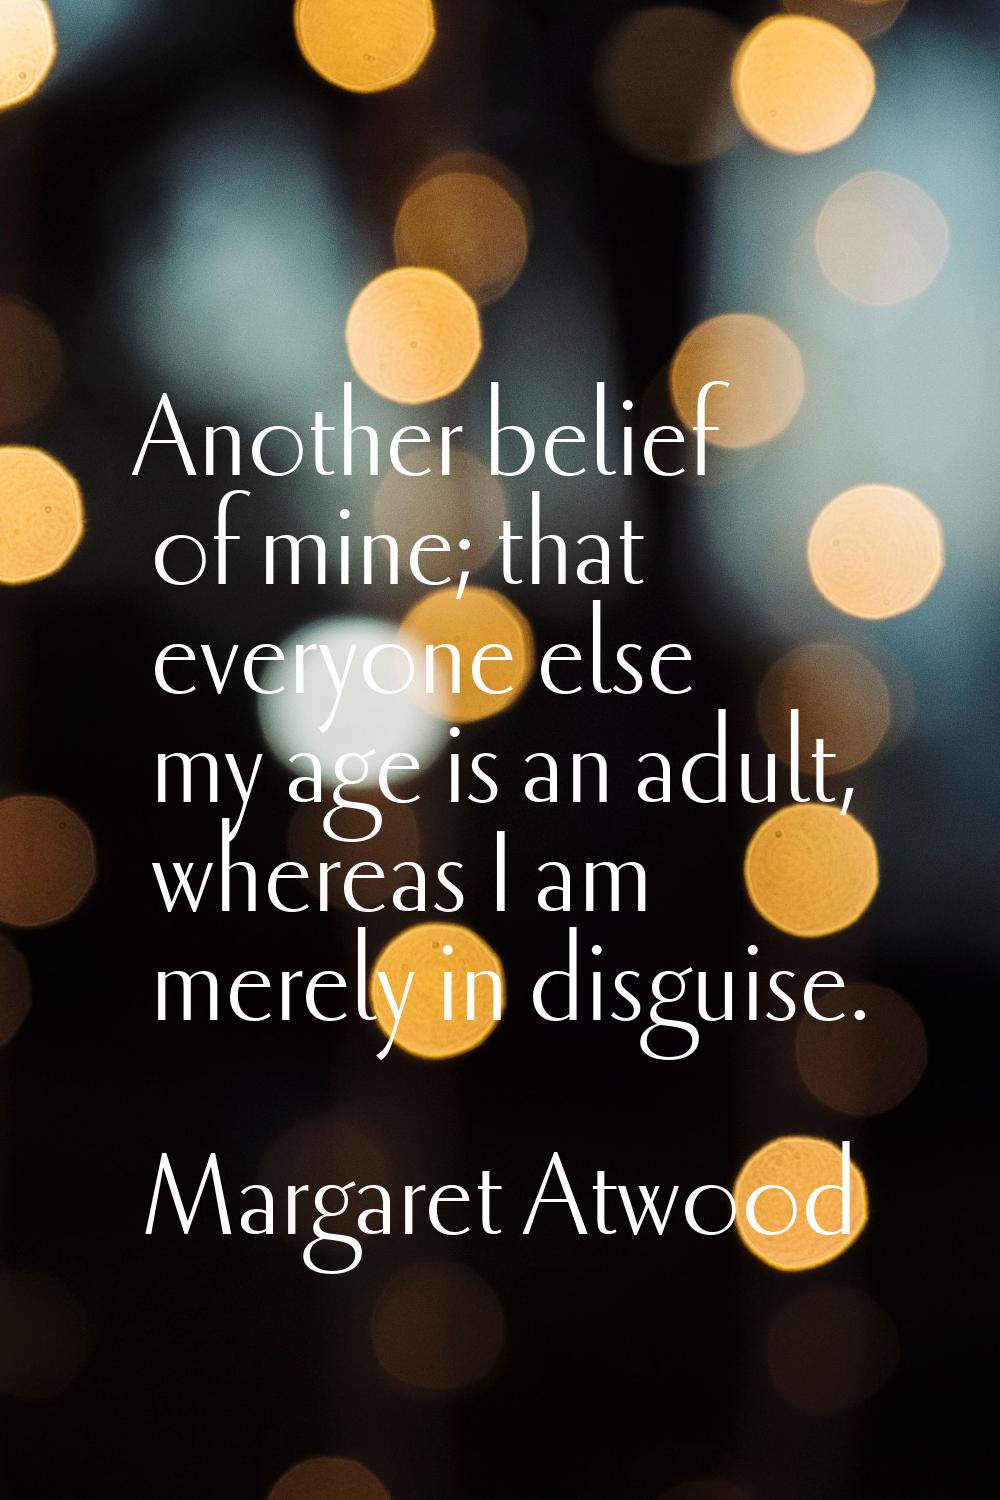 Another belief of mine; that everyone else my age is an adult, whereas I am merely in disguise.